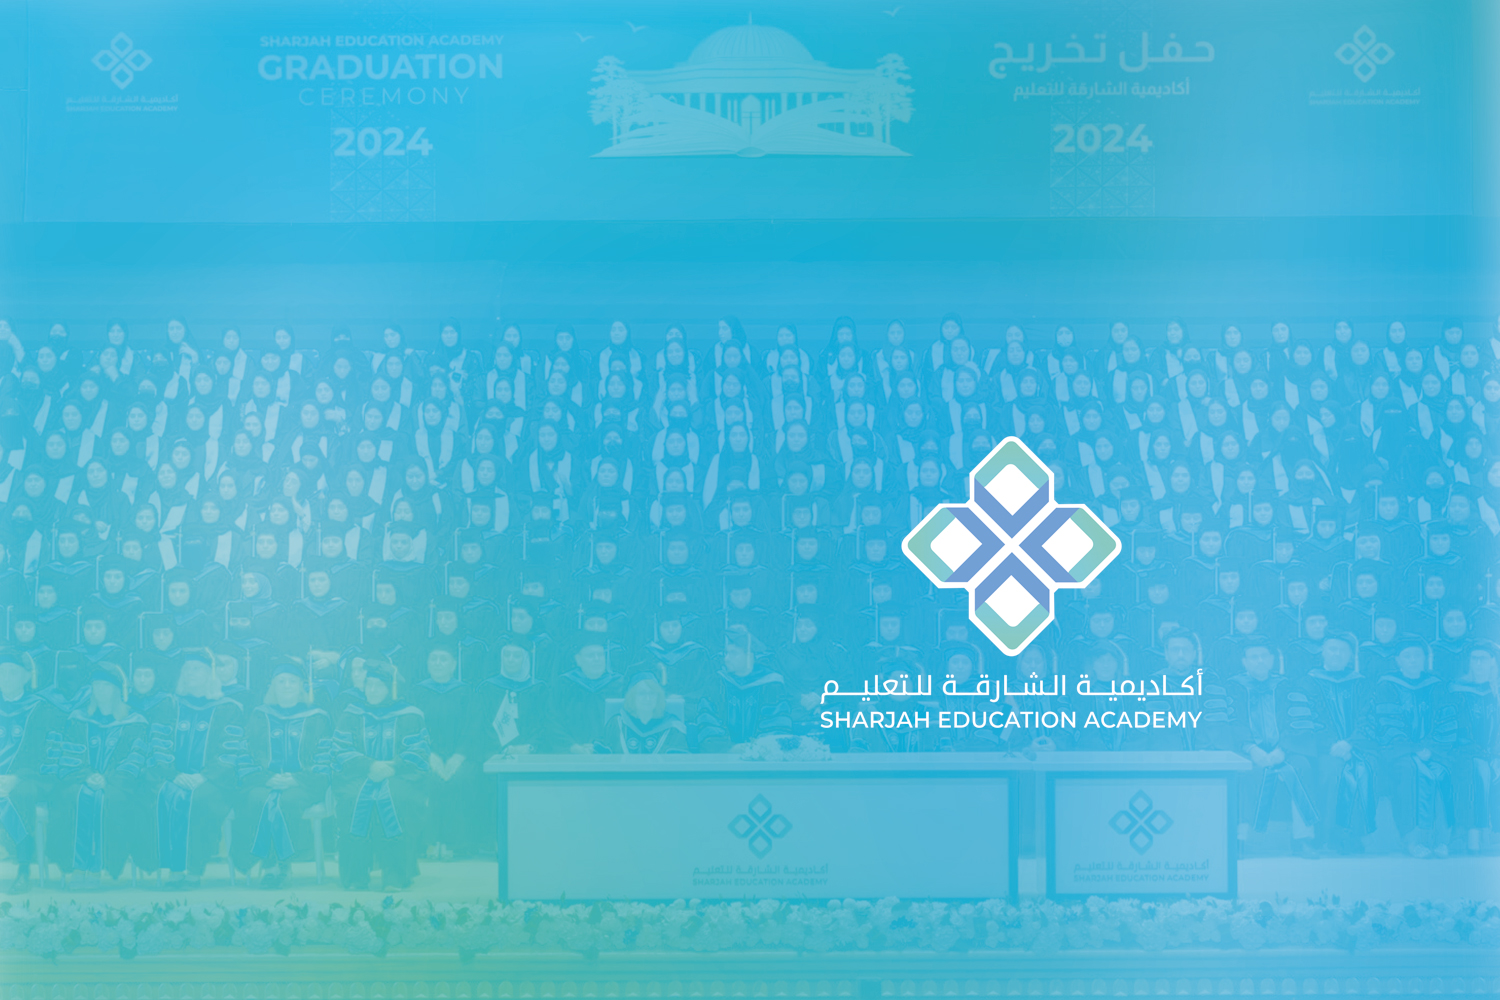 Crafting an Inspirational Sonic Identity for Sharjah Education Academy